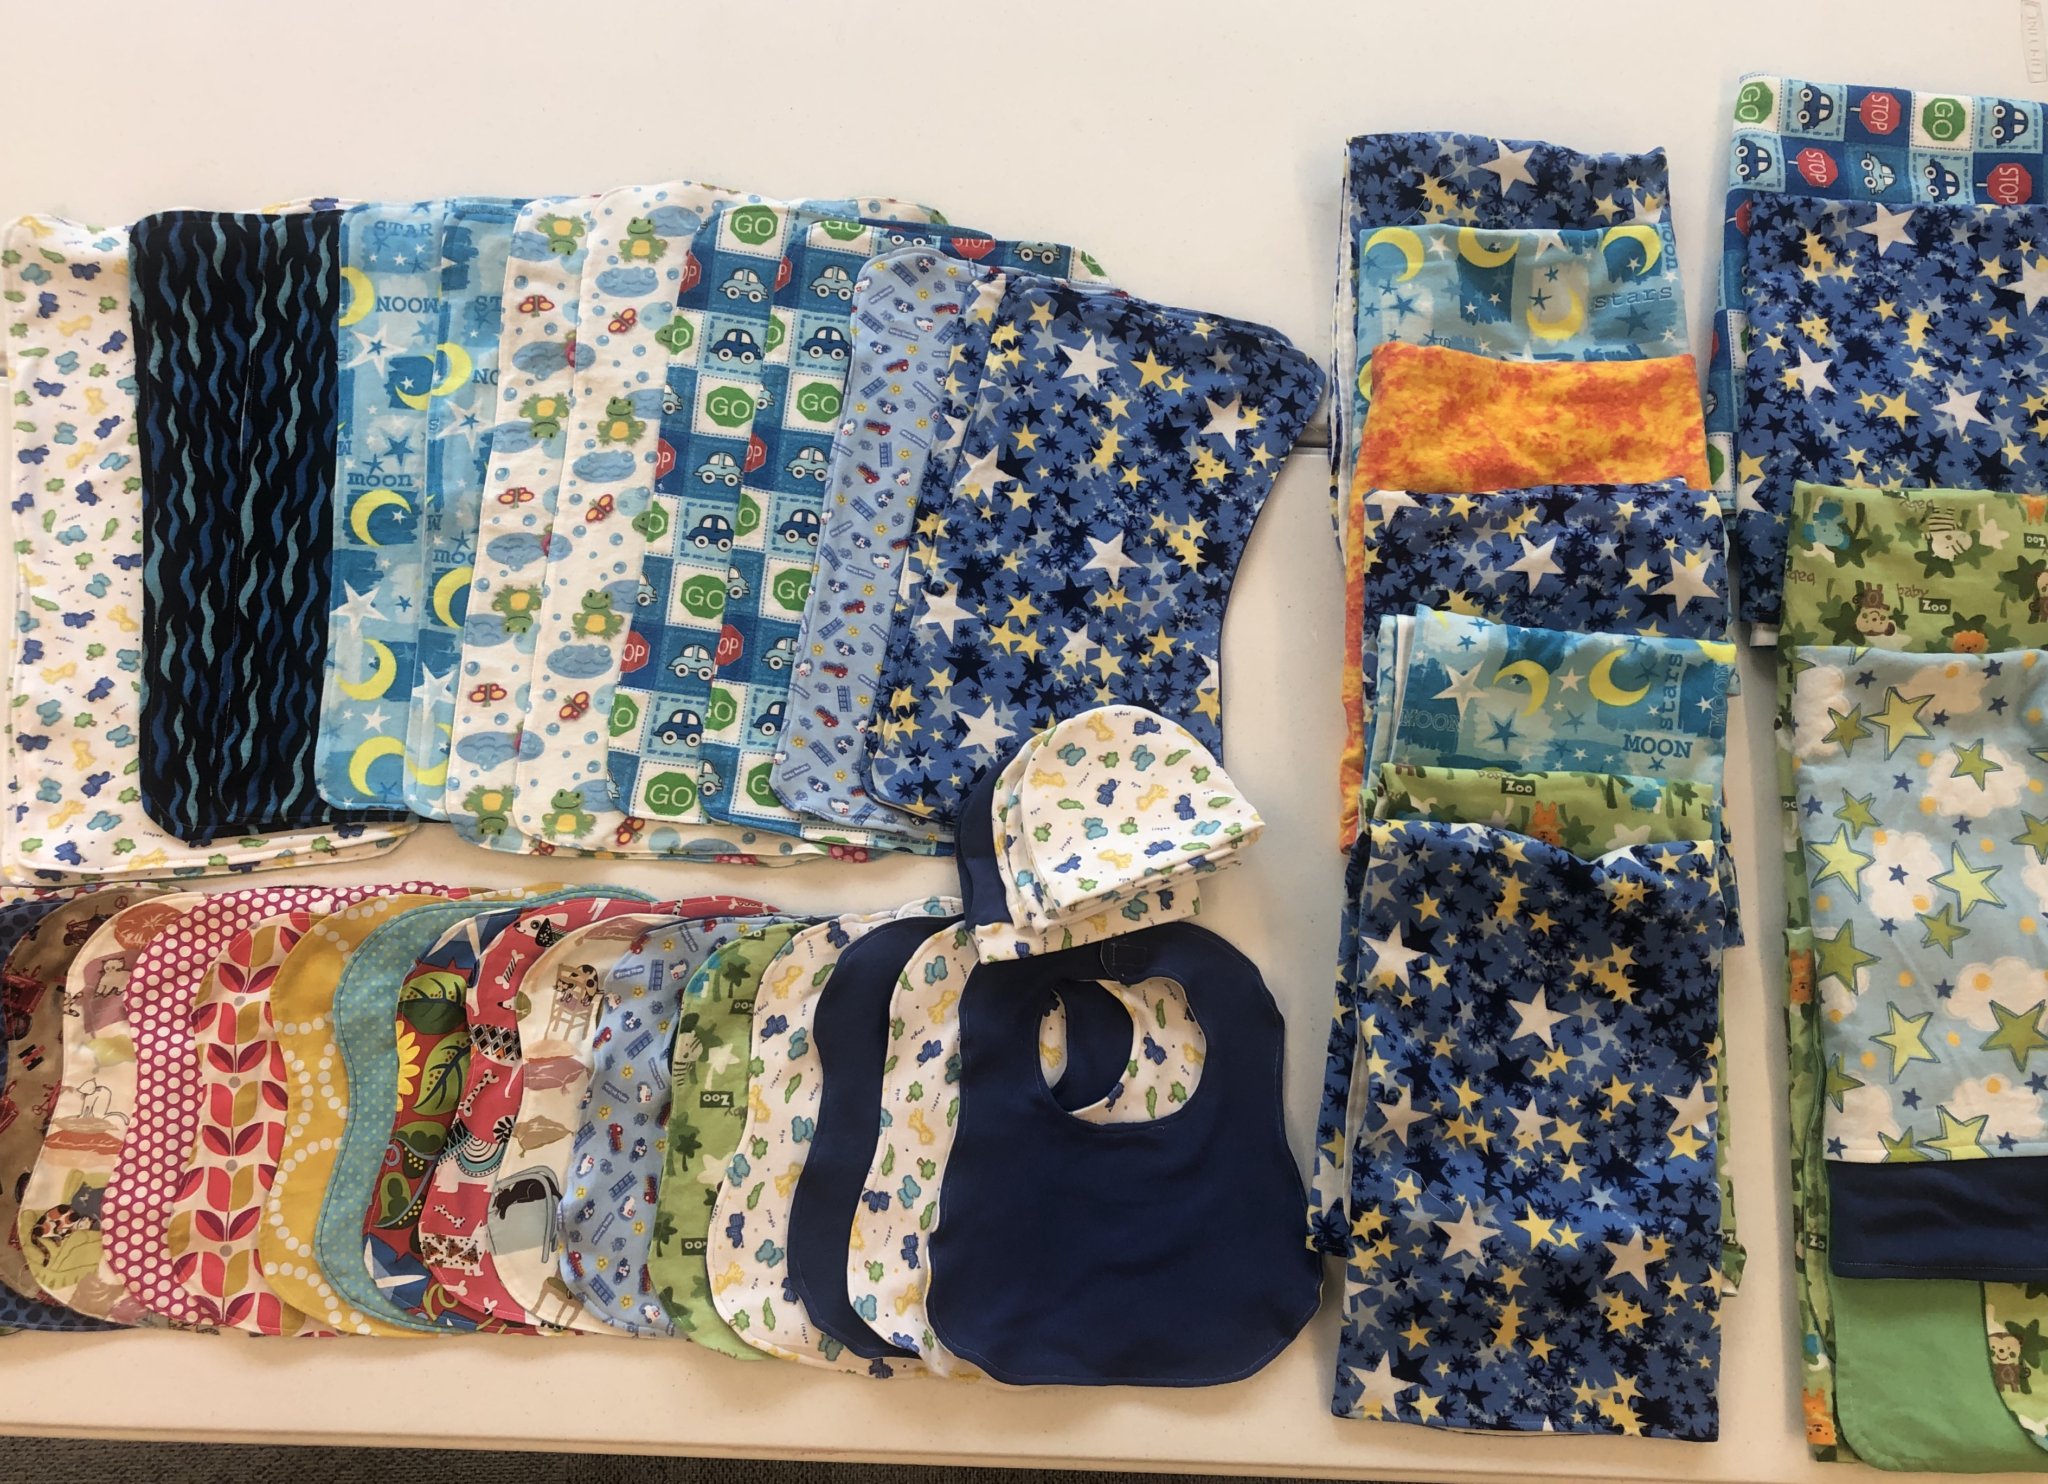 Community Service Sewing Project - Baby Items for Various Nonprofits